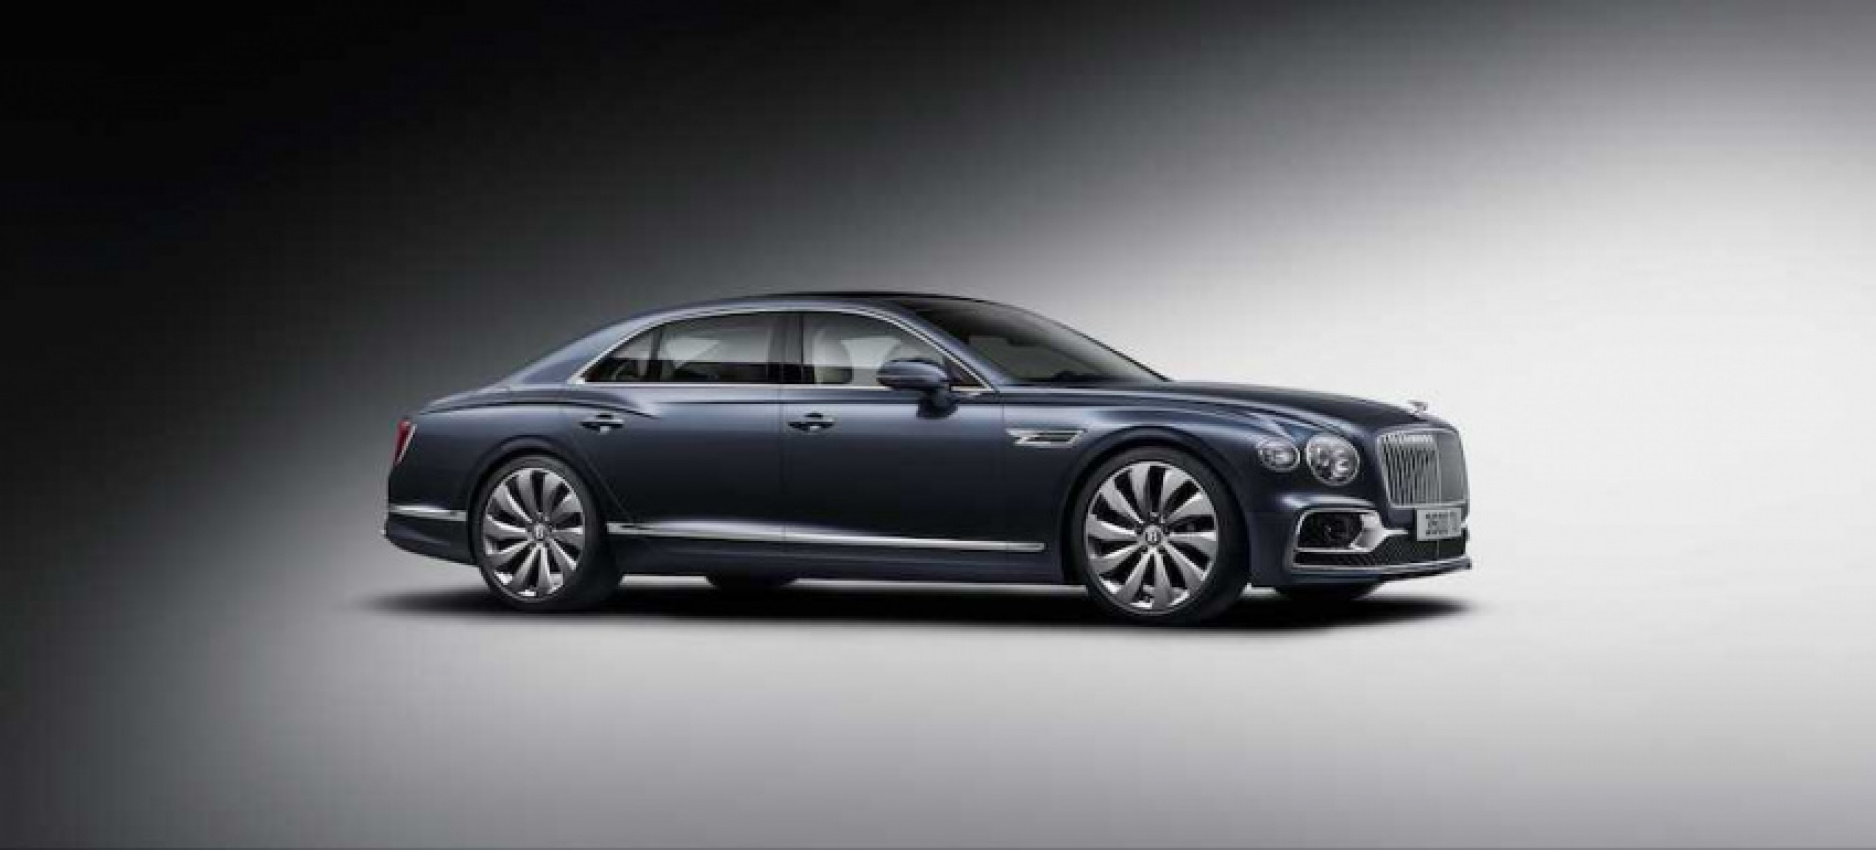 autos, bentley, cars, bentley lifts the lid on luxurious new flying spur